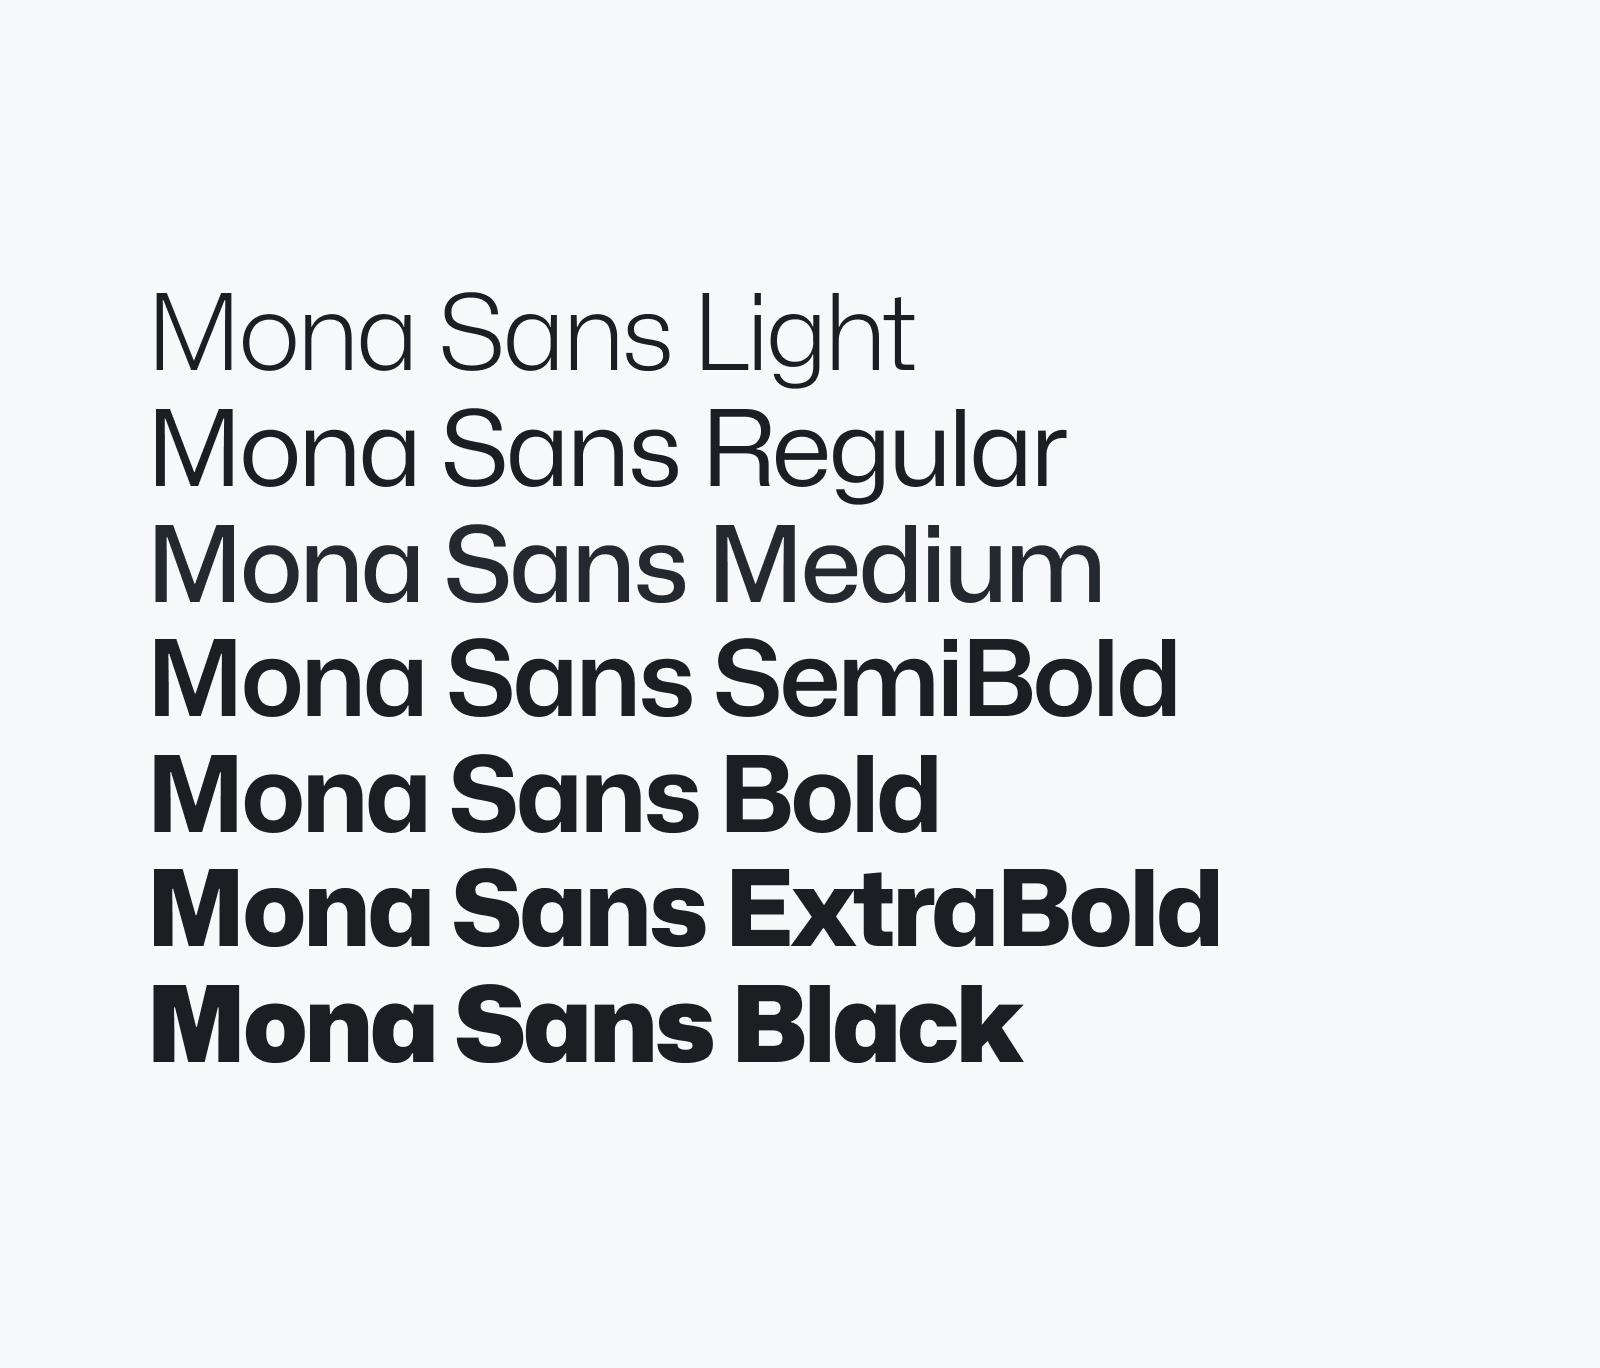 Examples of Mona Sans font in action